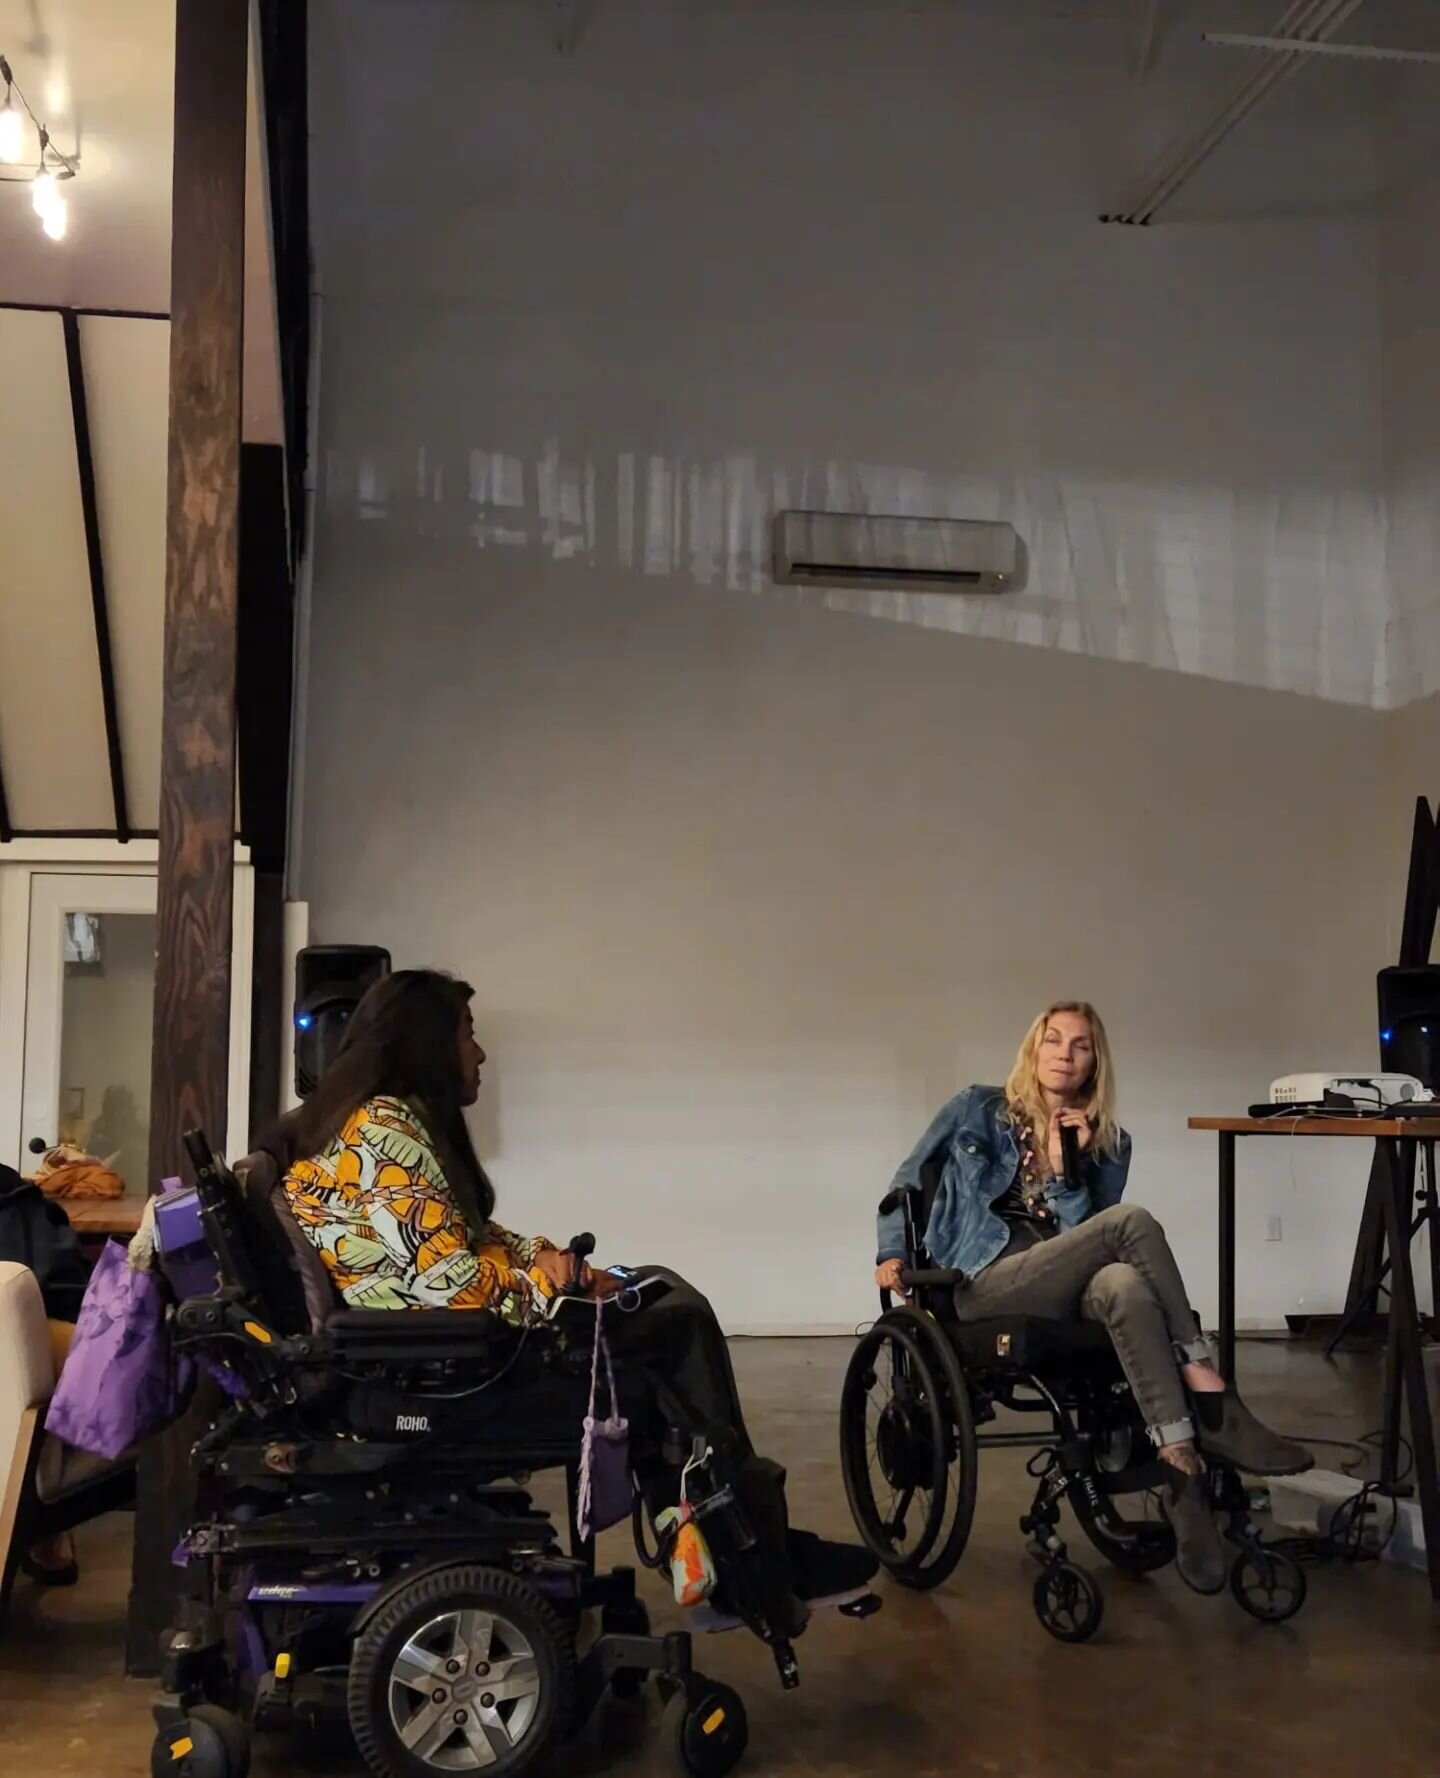 Throw back to when @maui_wheelers hosted an evening with the epic @movememovie crew! This was a great night watching a really beautiful &amp; honest story about recovery from spinal cord injury and digging into who we really are at our core. Thank yo